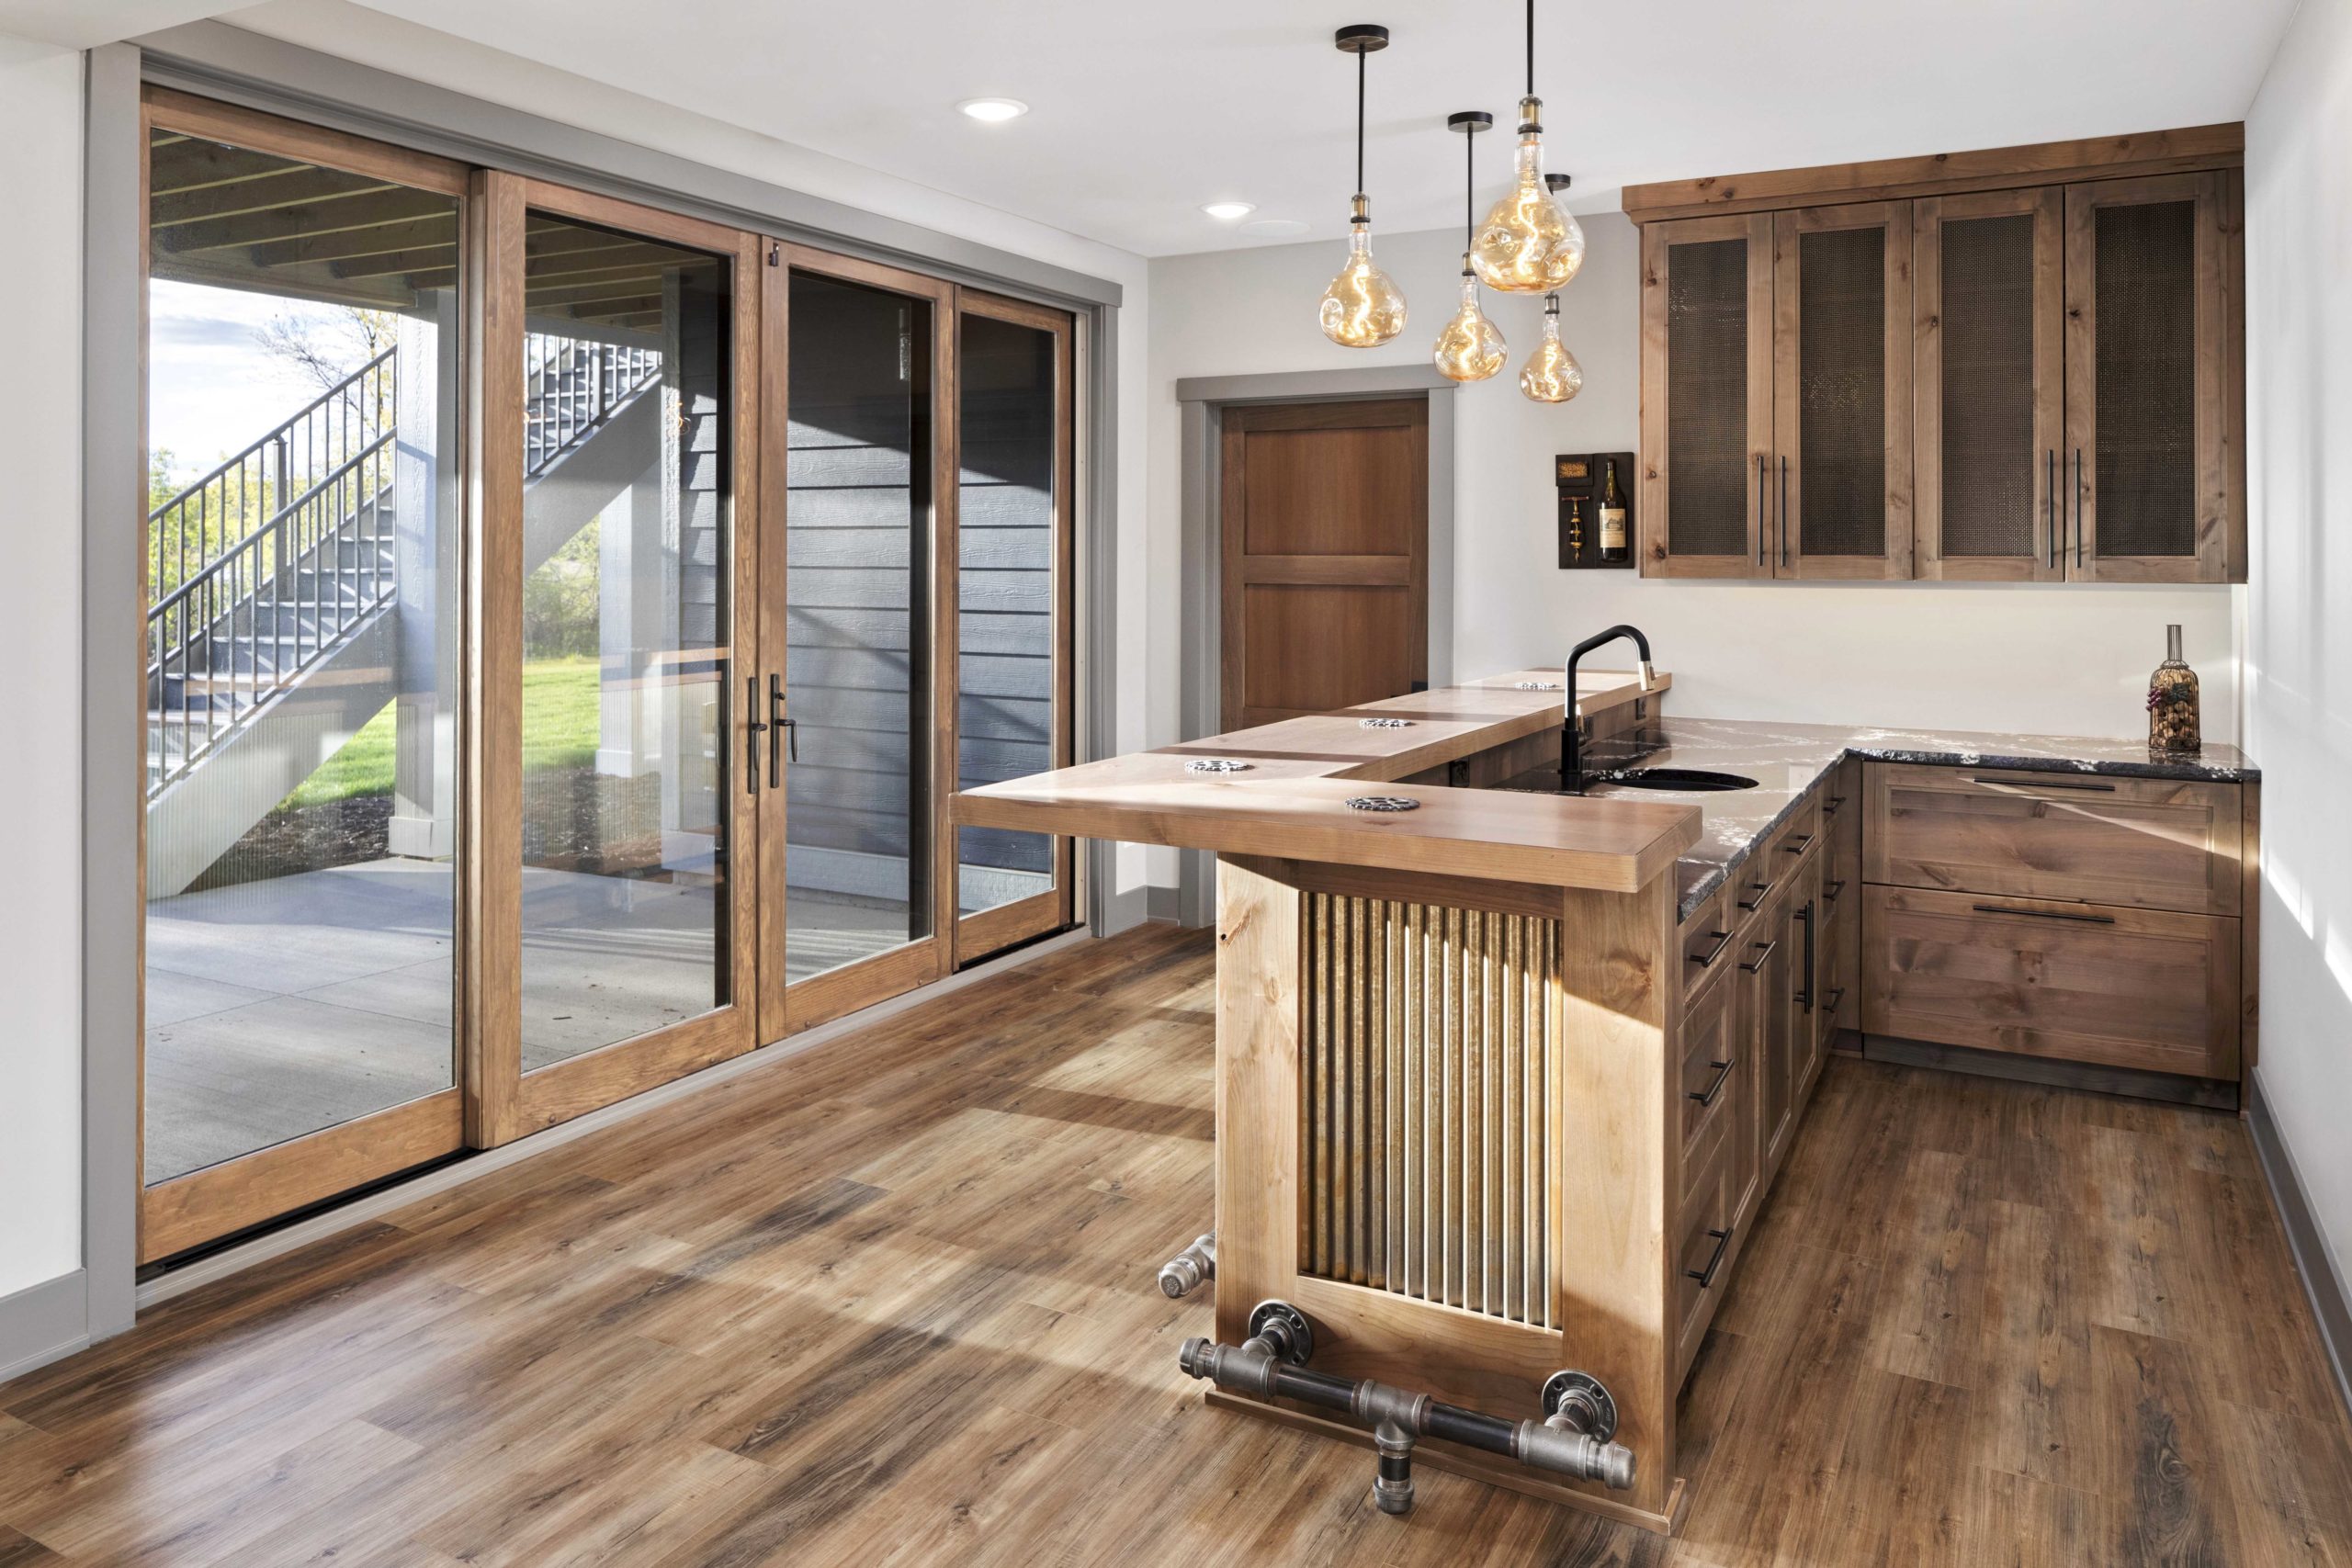 A kitchen with wood floors and sliding glass doors.